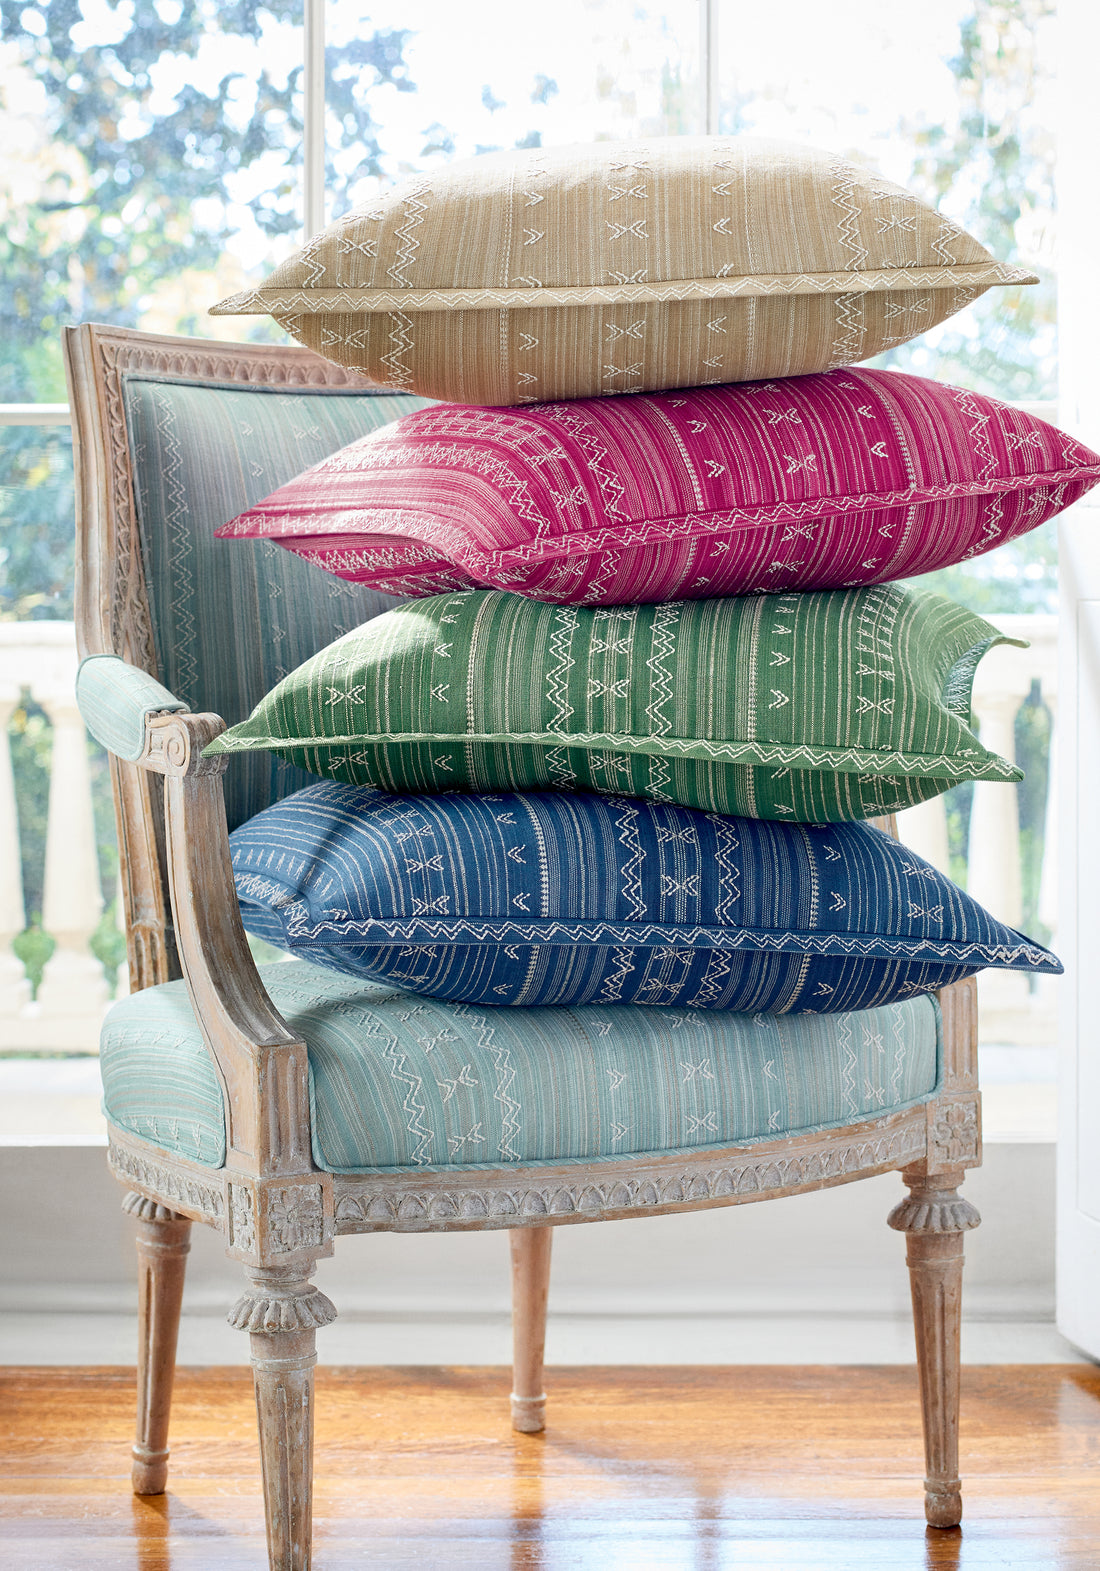 Pillow featuring Charter Stripe Embroidery fabric in green color - pattern number W736458 - by Thibaut in the Indienne collection